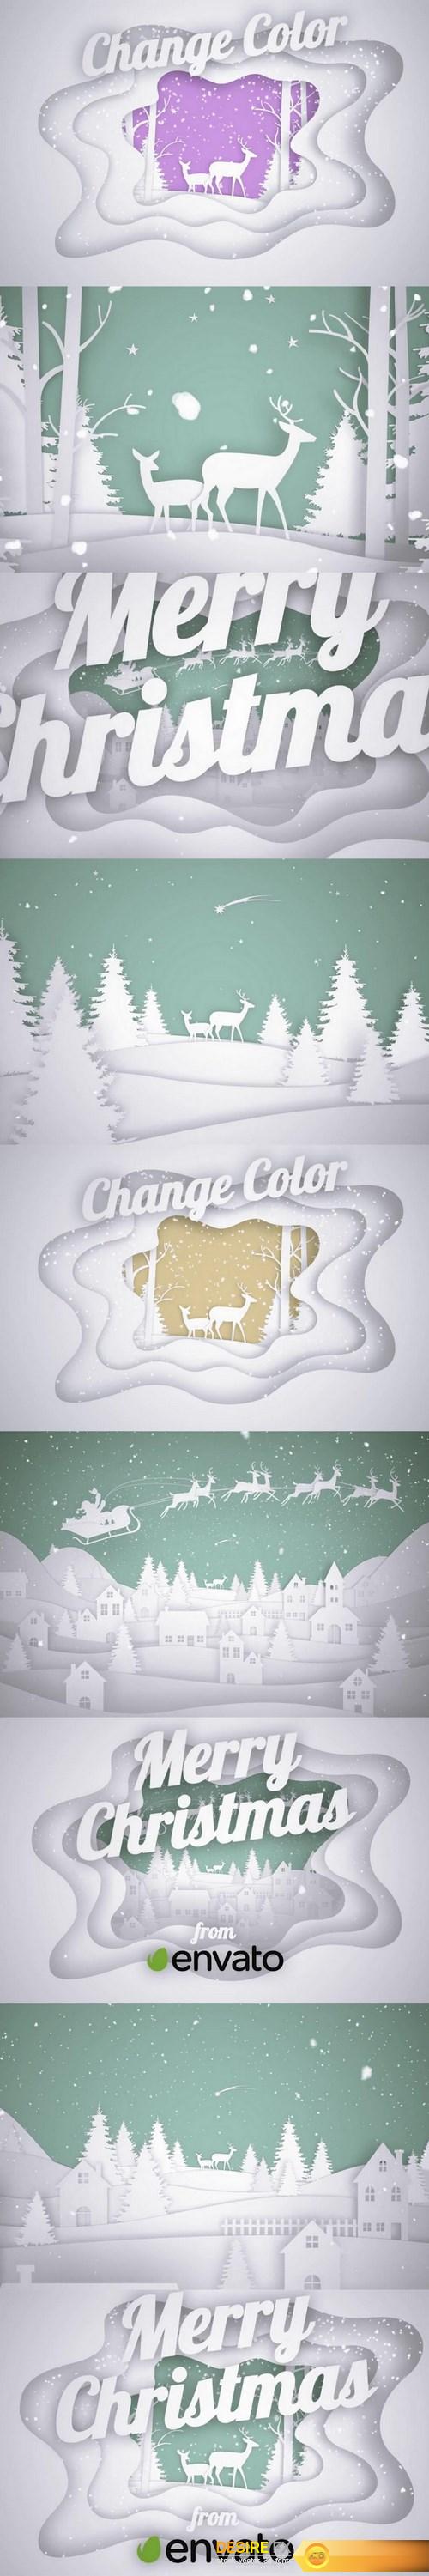 videohive-20948014-christmas-greetings-paper-cut-out